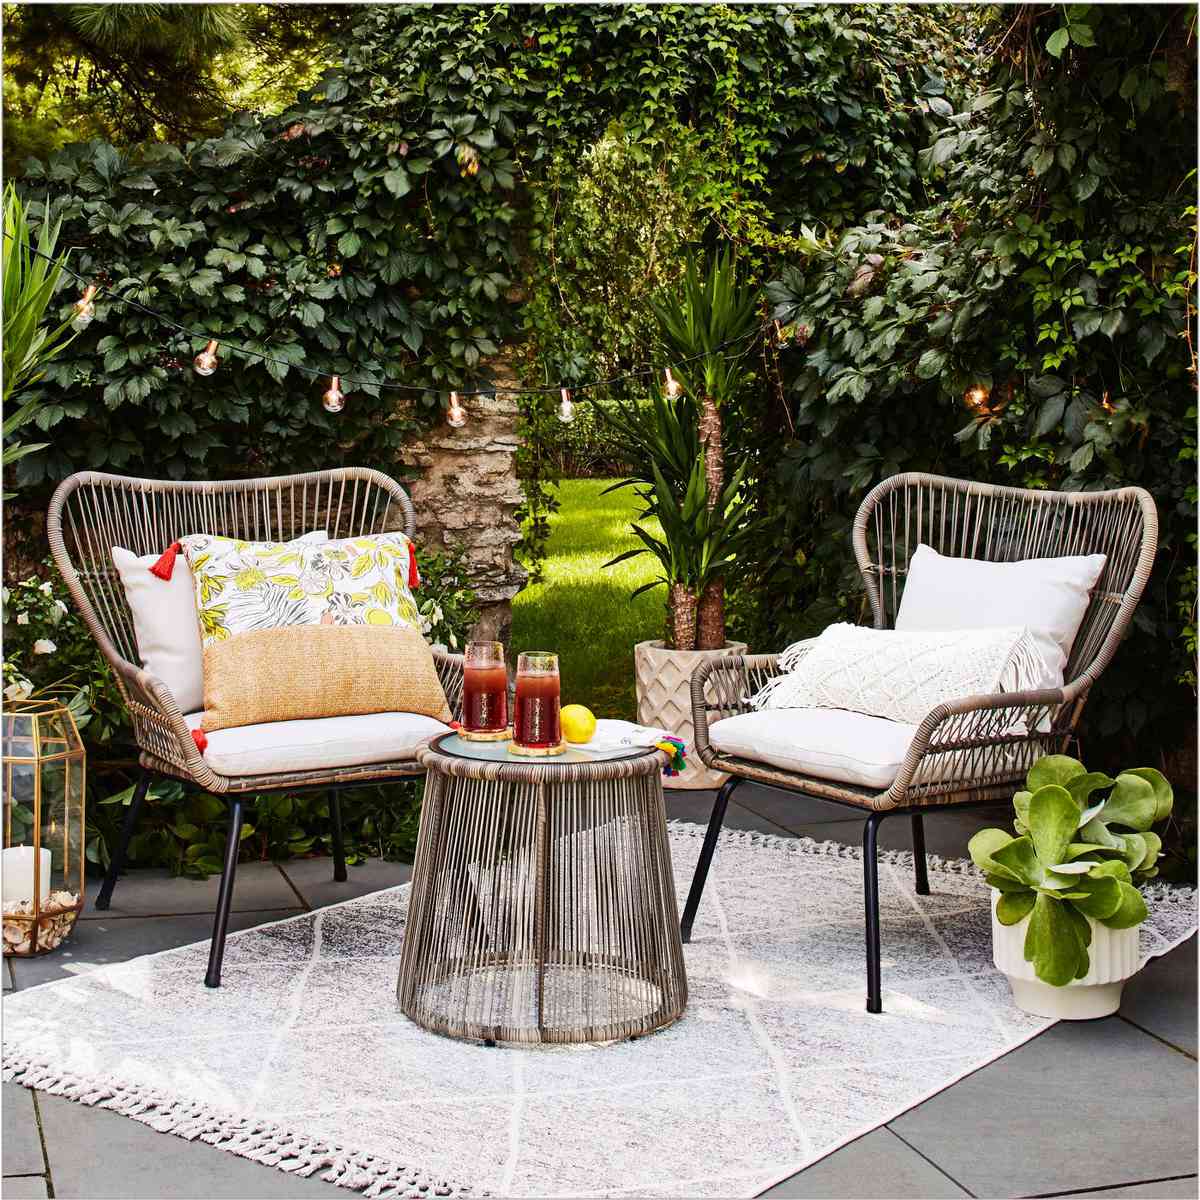 Best Outdoor Furniture For Small Spaces, Outdoor Furniture Winter Storage Ideas